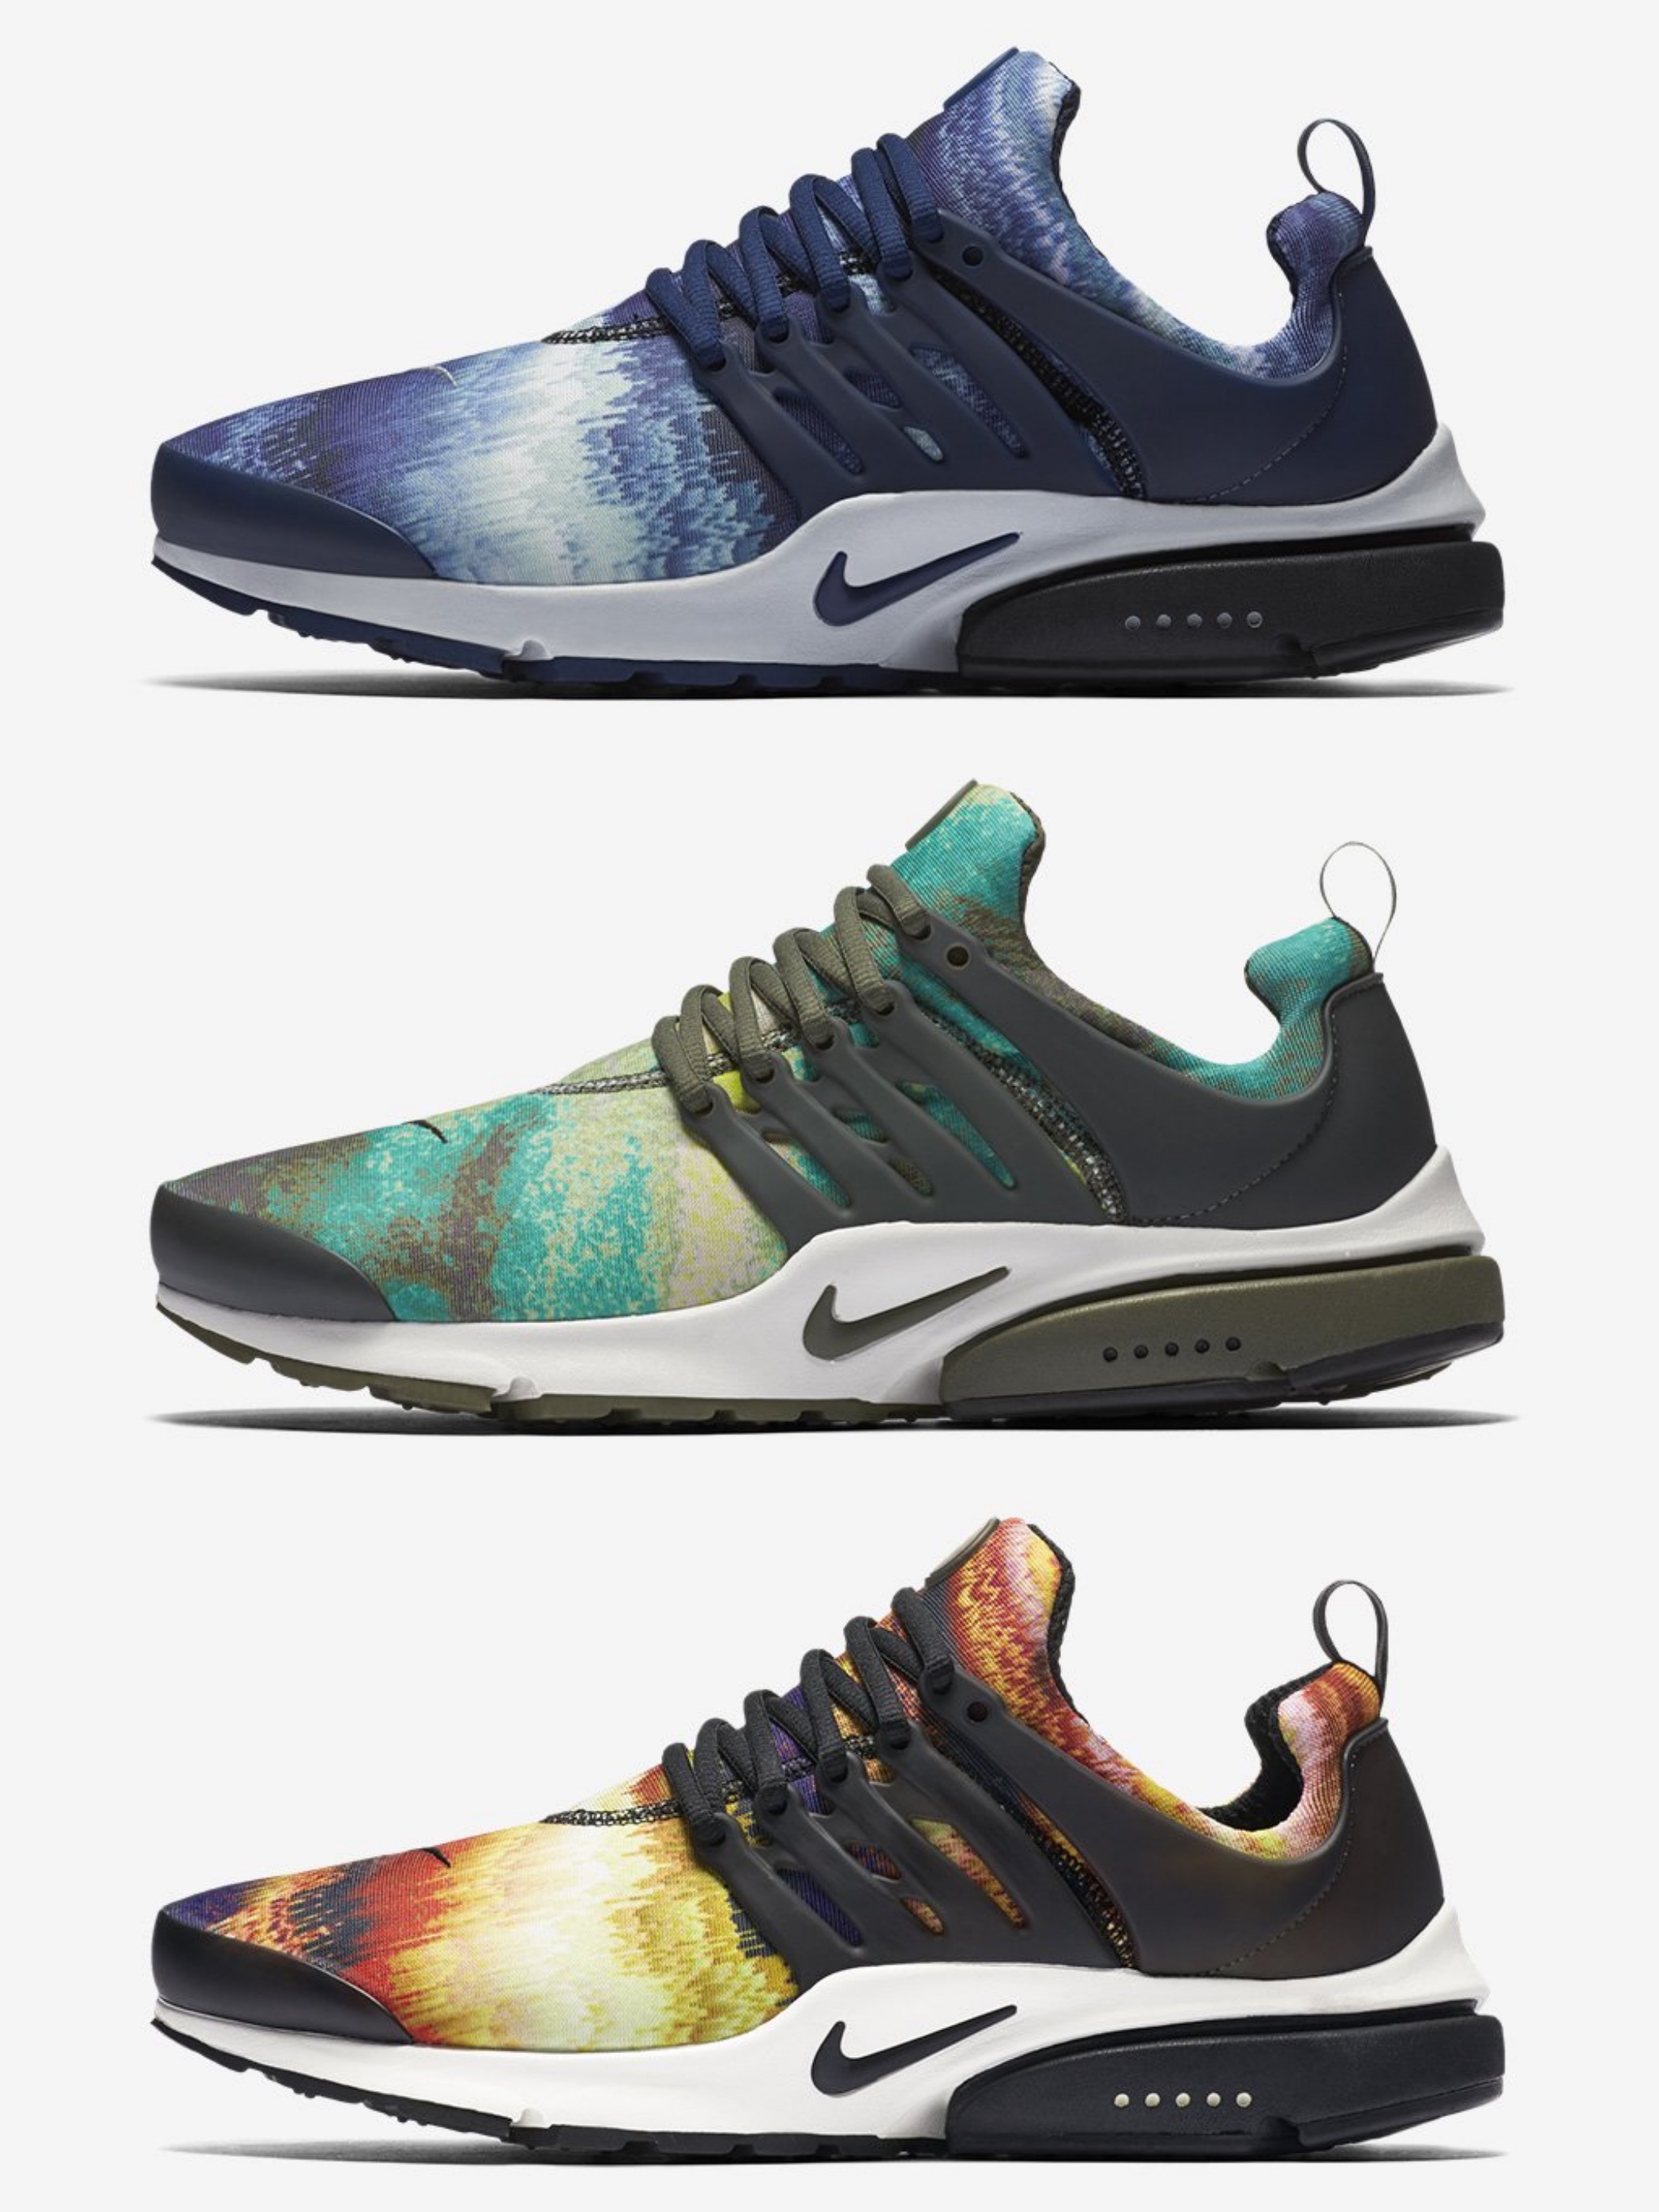 Pick Fire, Grass, or Water with This Nike Air Presto GPX Pack